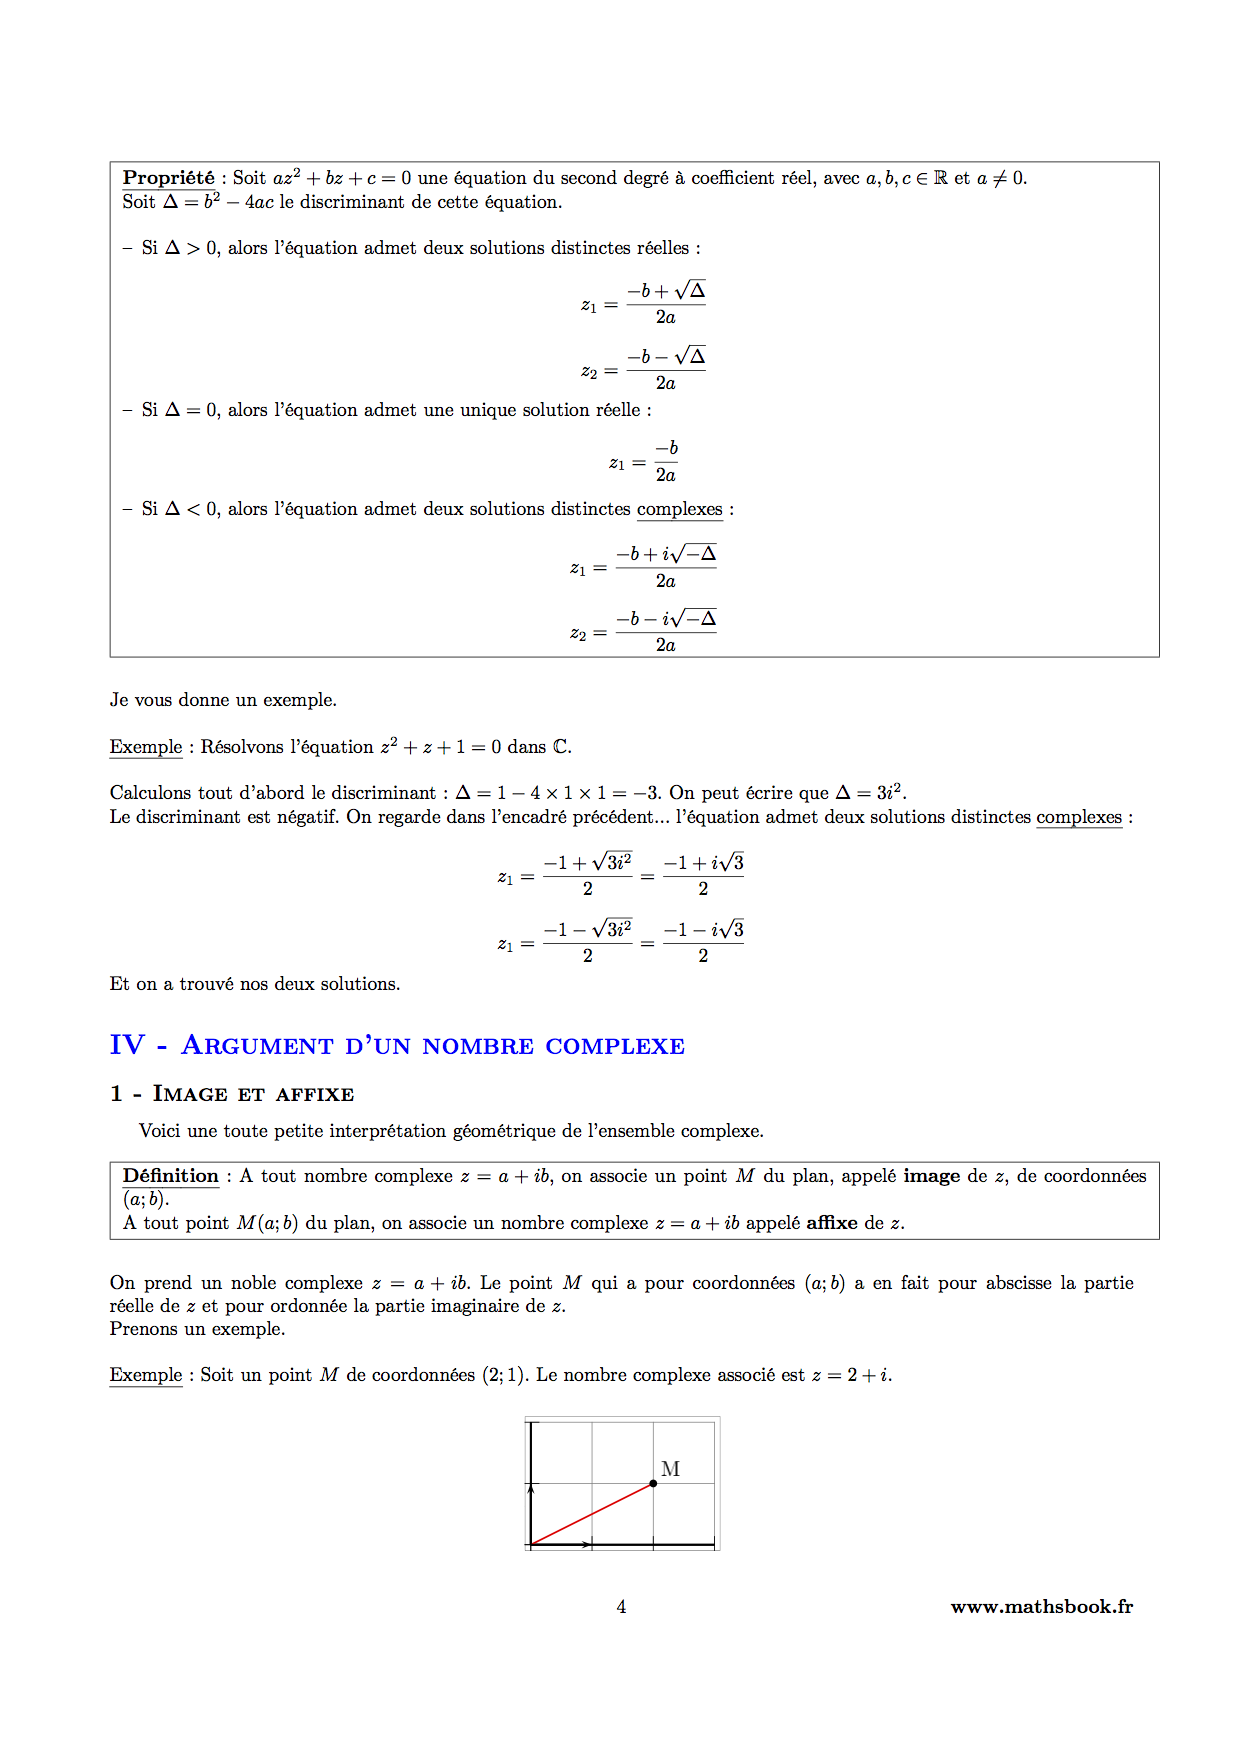 resolution equation second degre complexe